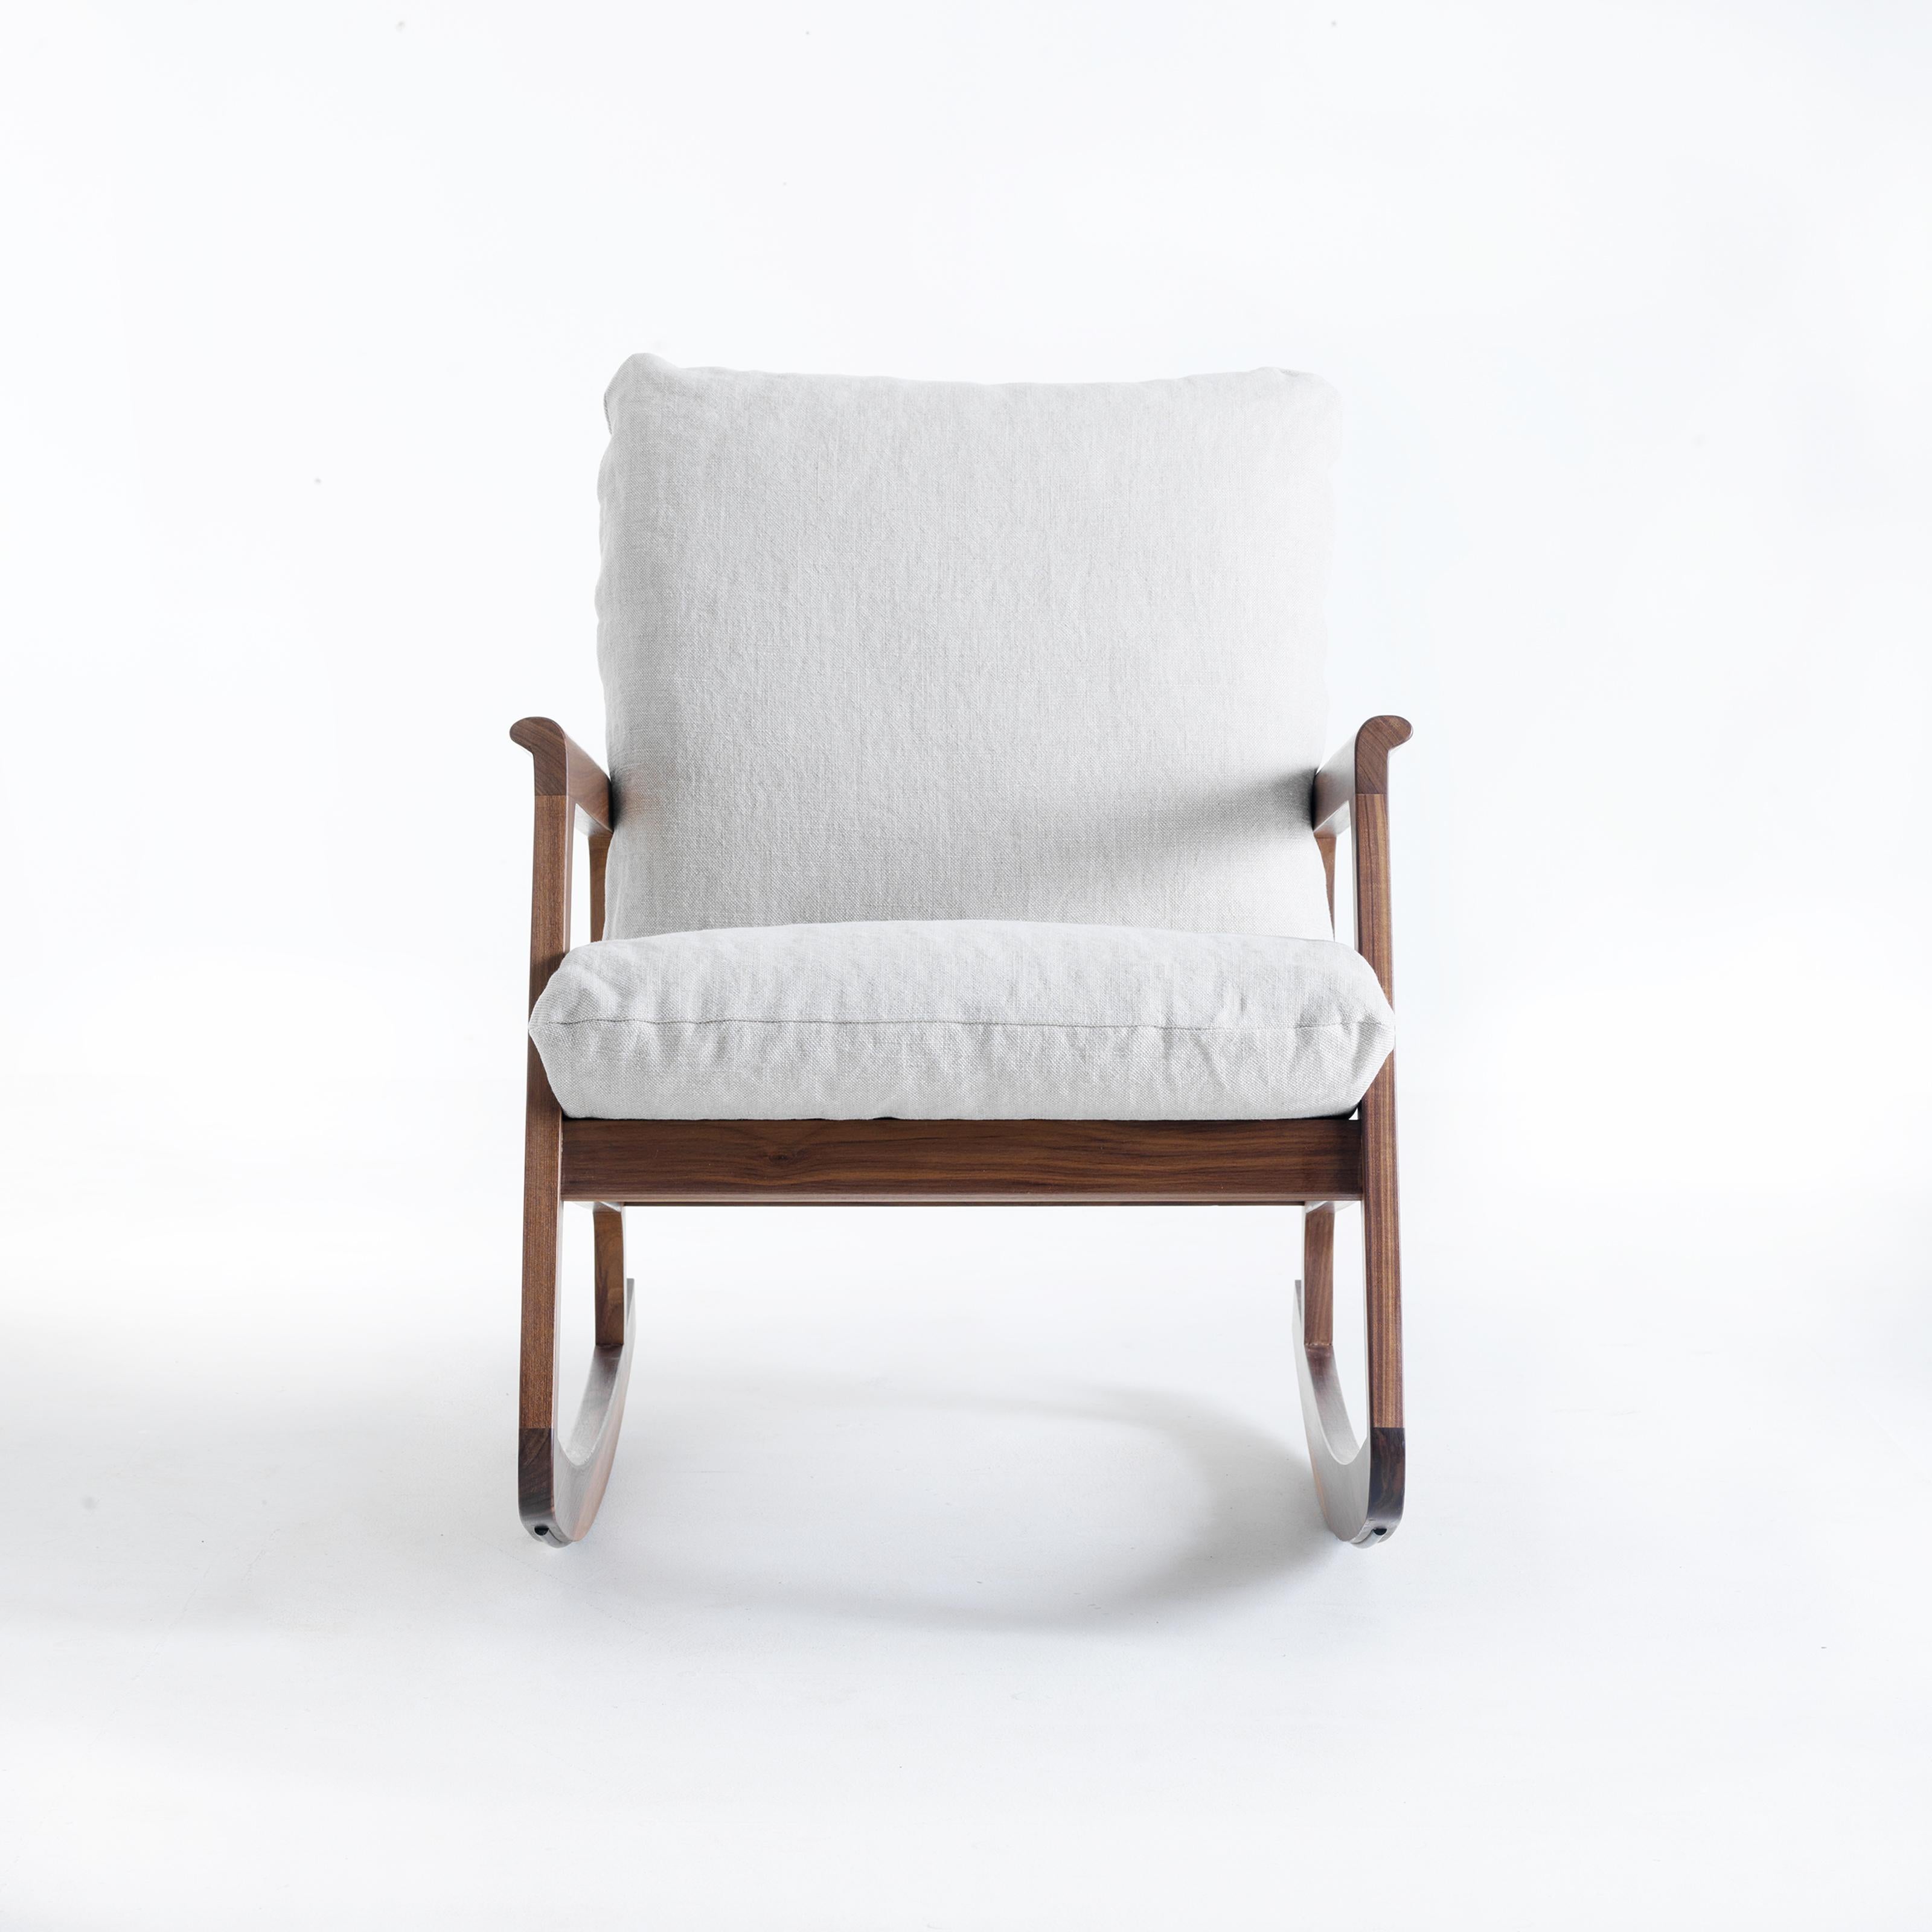 Italian Momento Solid Wood Armchair, Walnut in Hand-Made Natural Finish, Contemporary For Sale